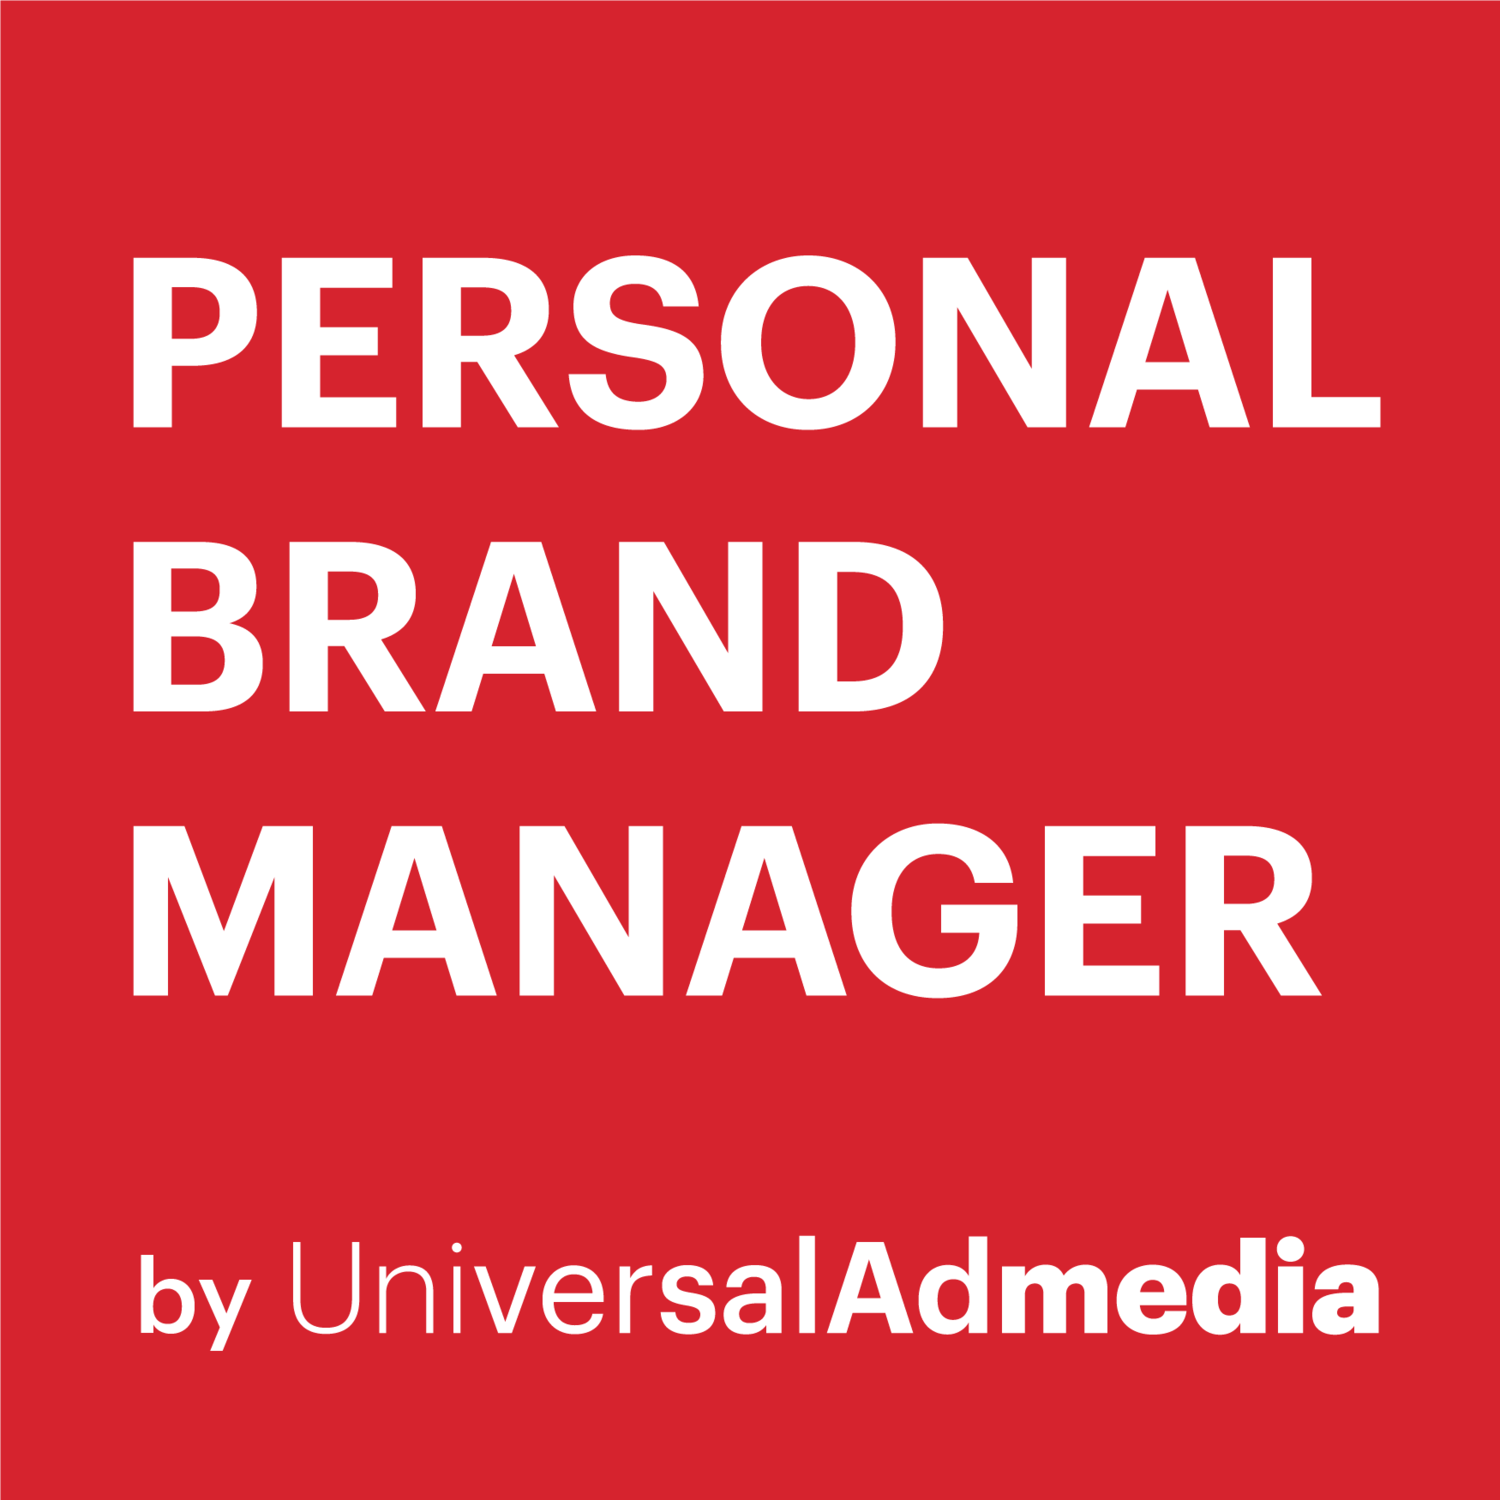 The Personal Brand Manager